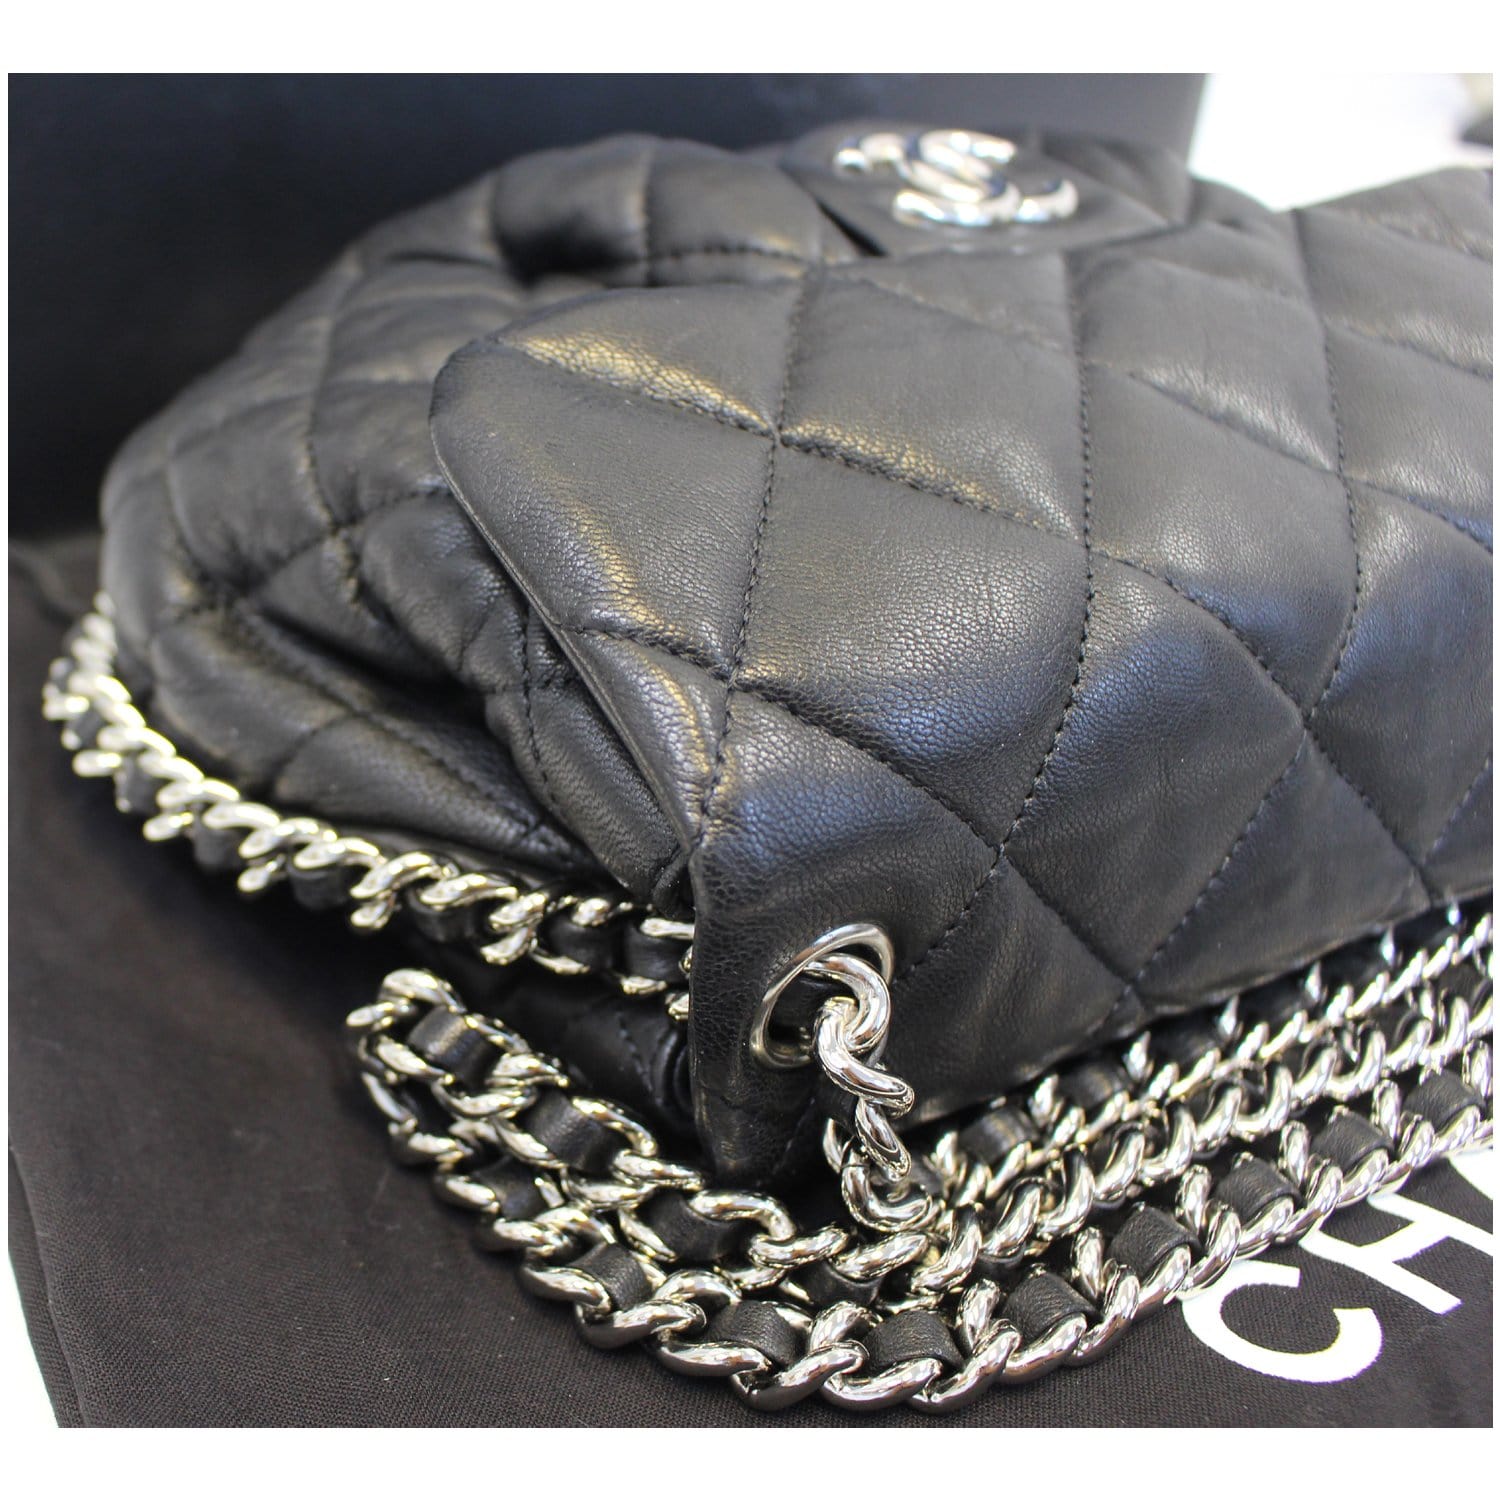 CHANEL Chain Around Quilted Leather Flap Shoulder Crossbody Bag Black-US